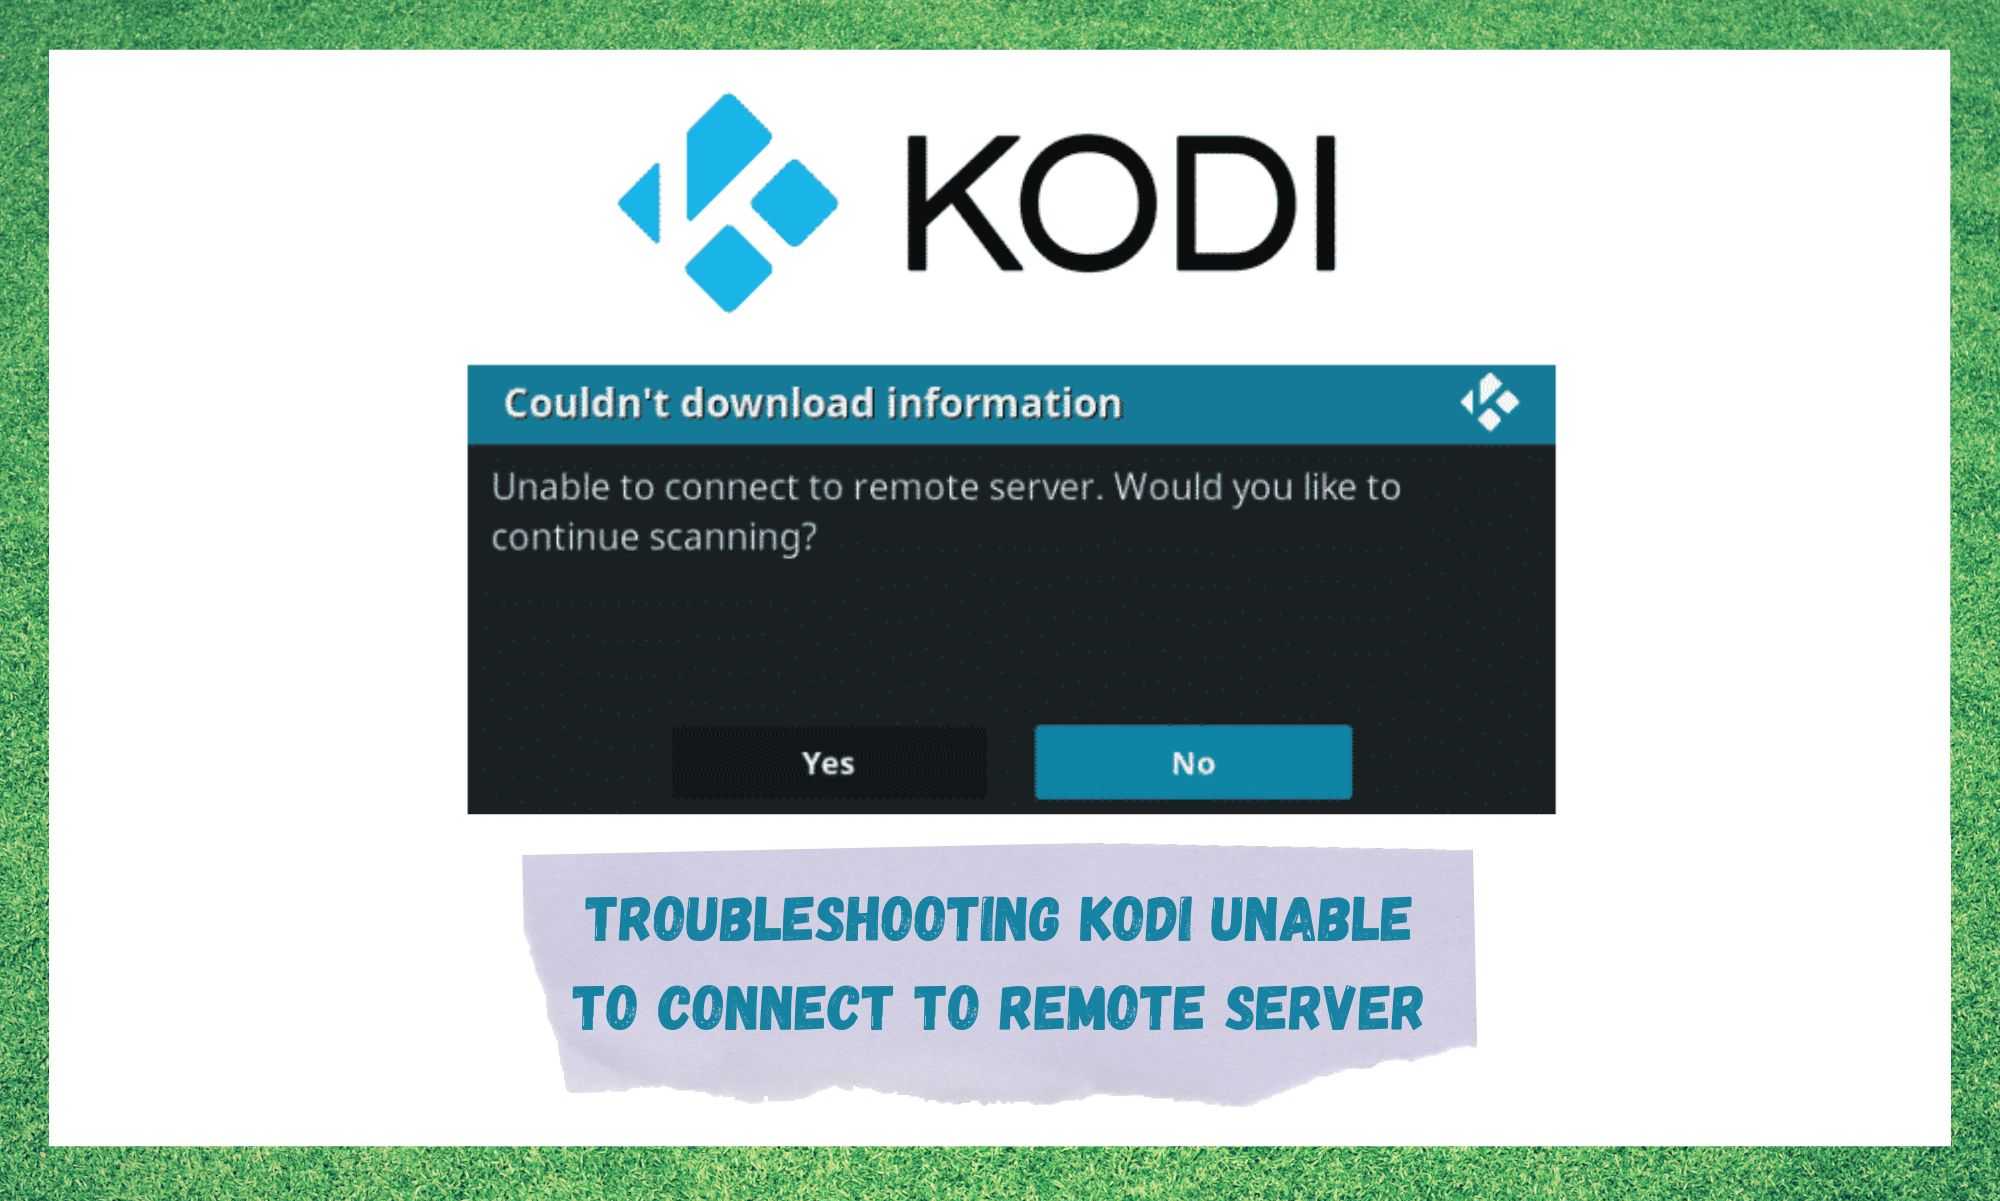 kodi unable to connect to remote server